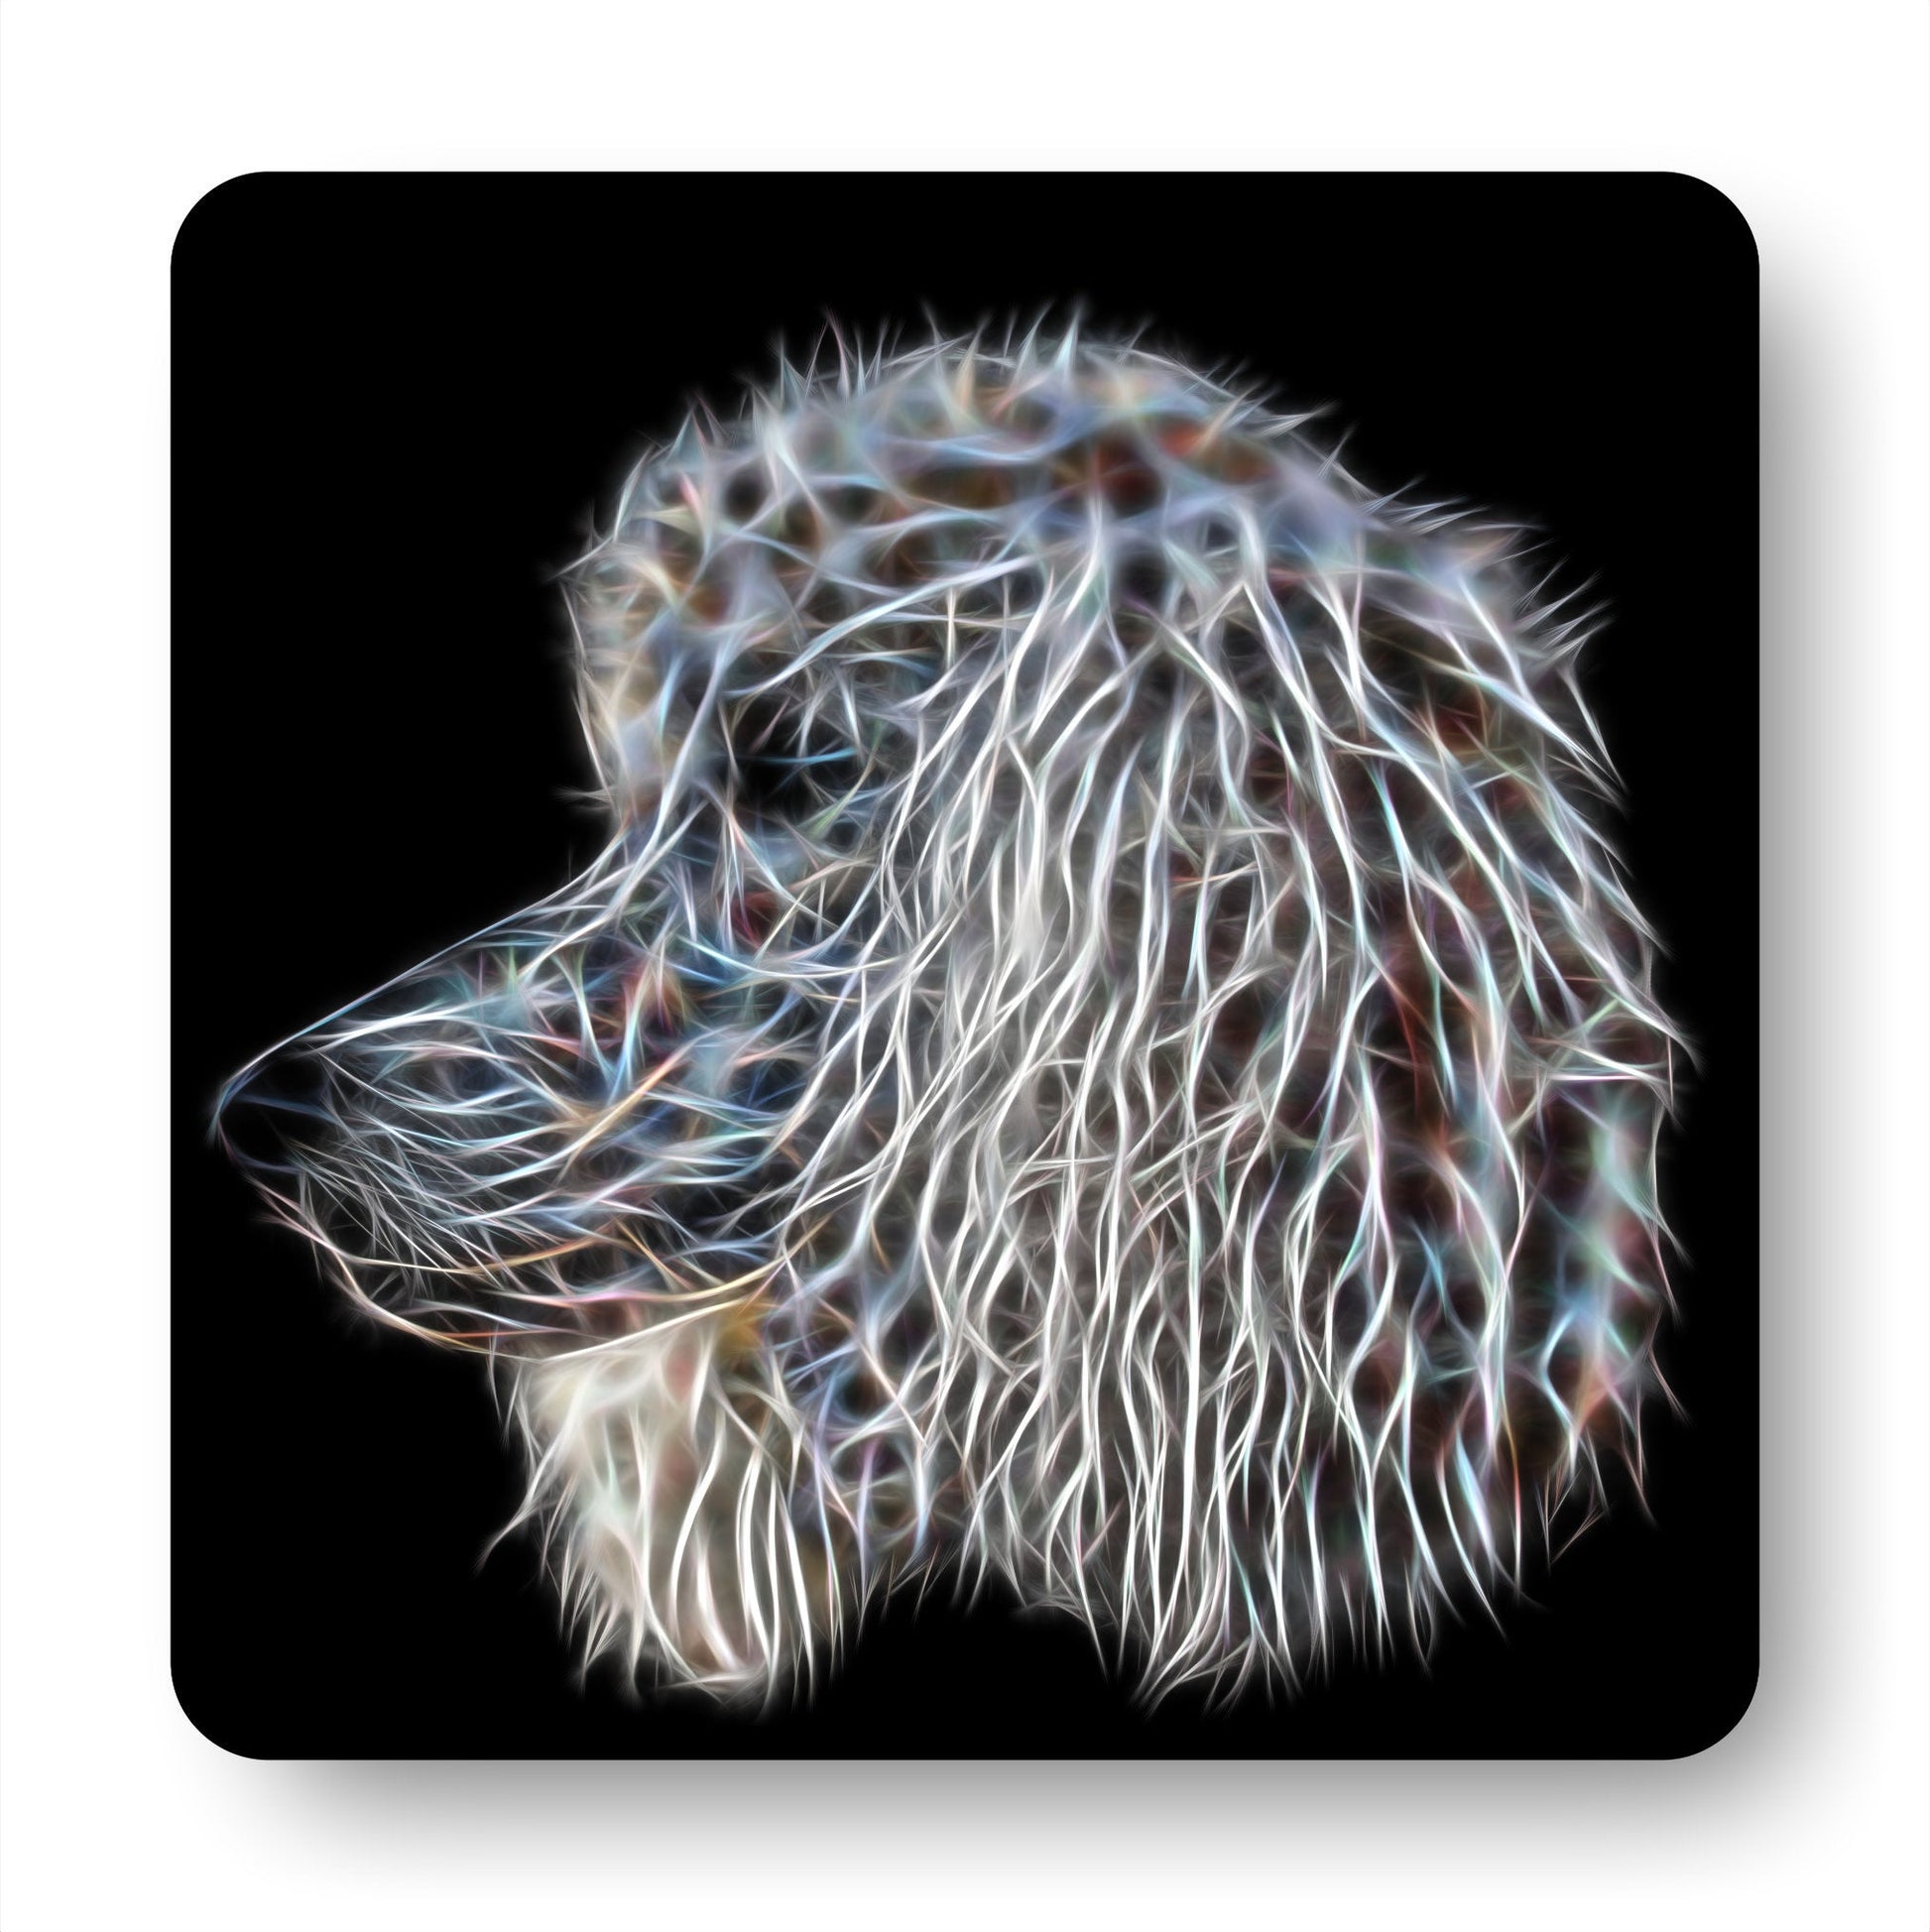 White Standard Poodle Coasters, Set of 4, with Stunning Fractal Art Design. Perfect Poodle Owner Gift.